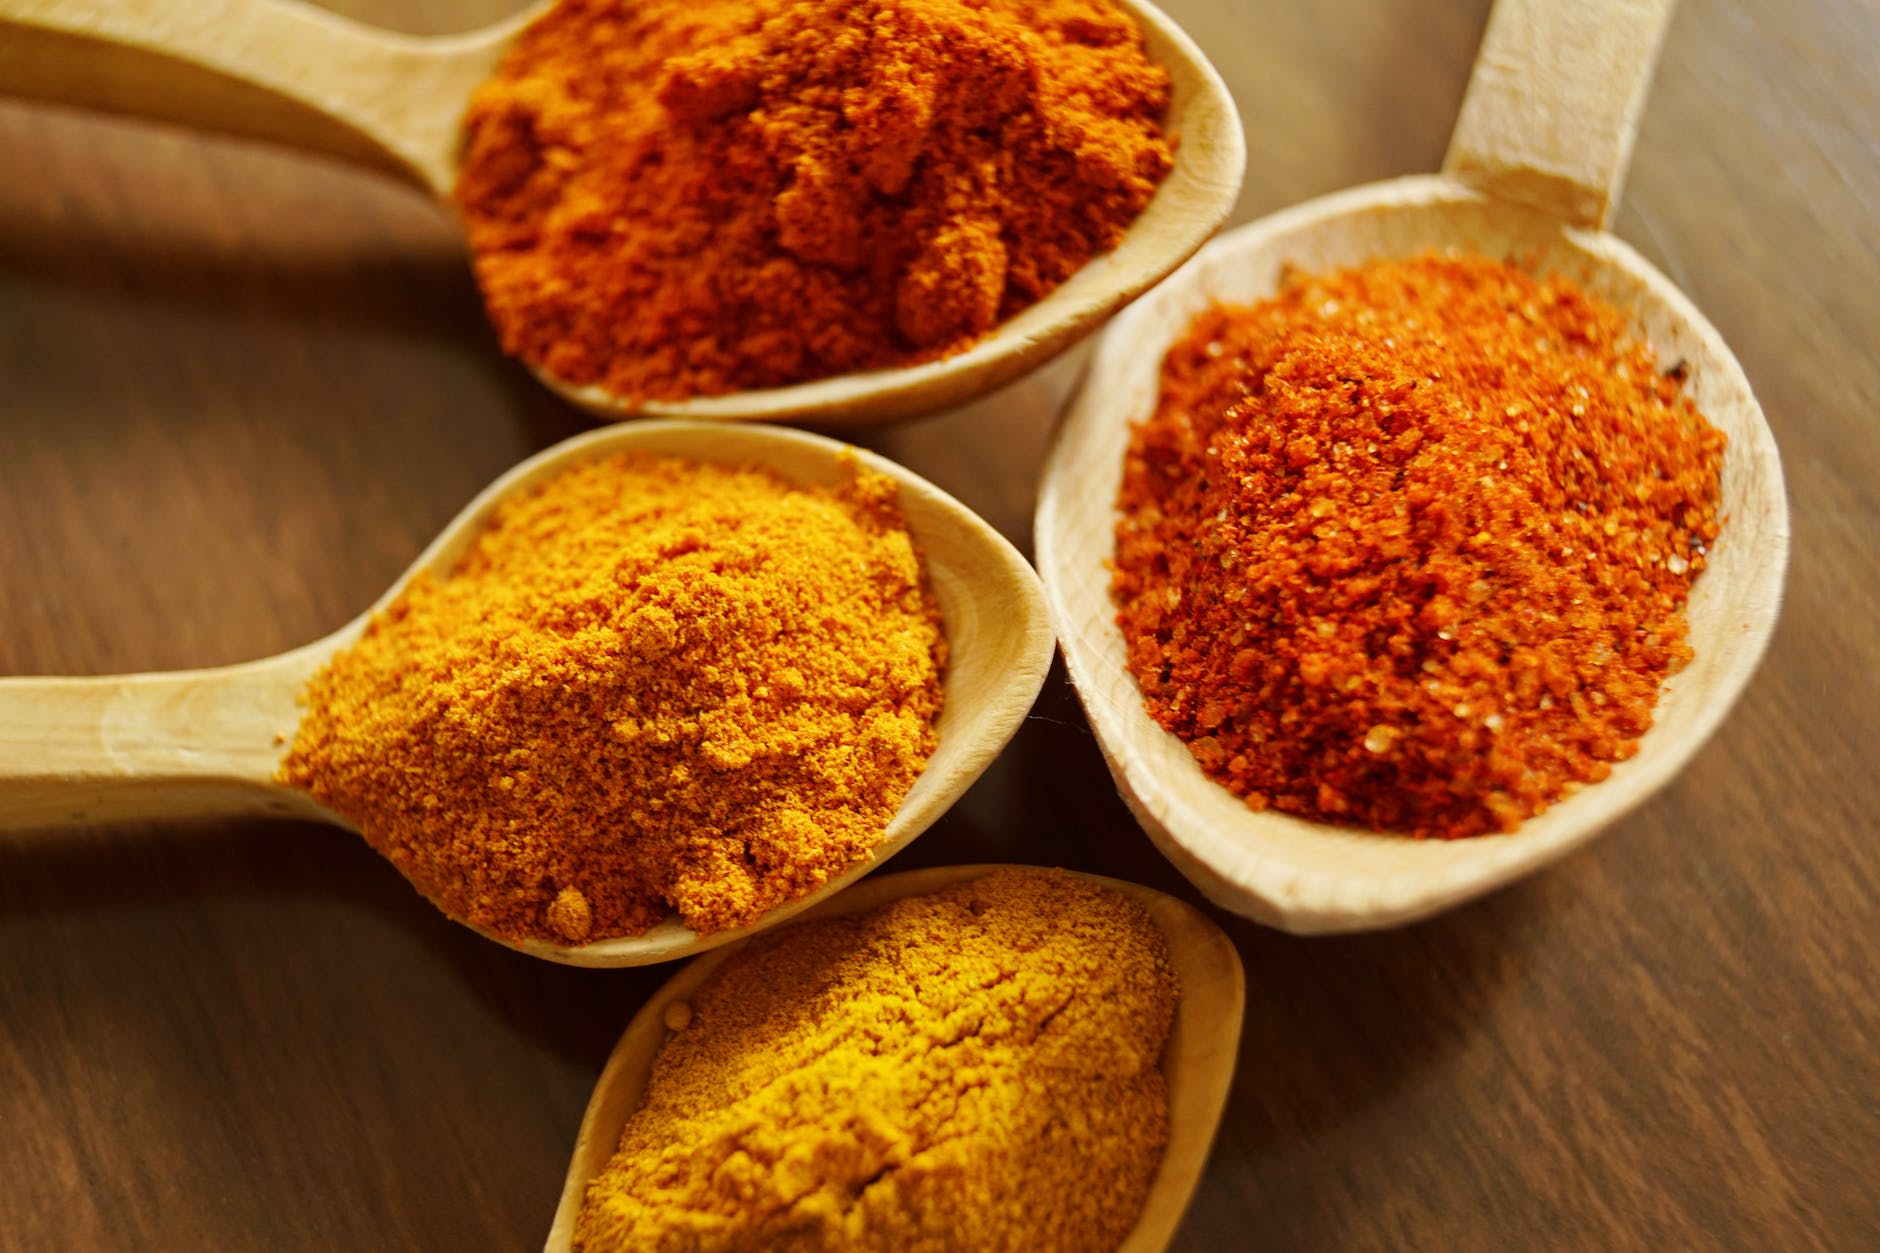 Best Turmeric Supplement for Your Health Needs